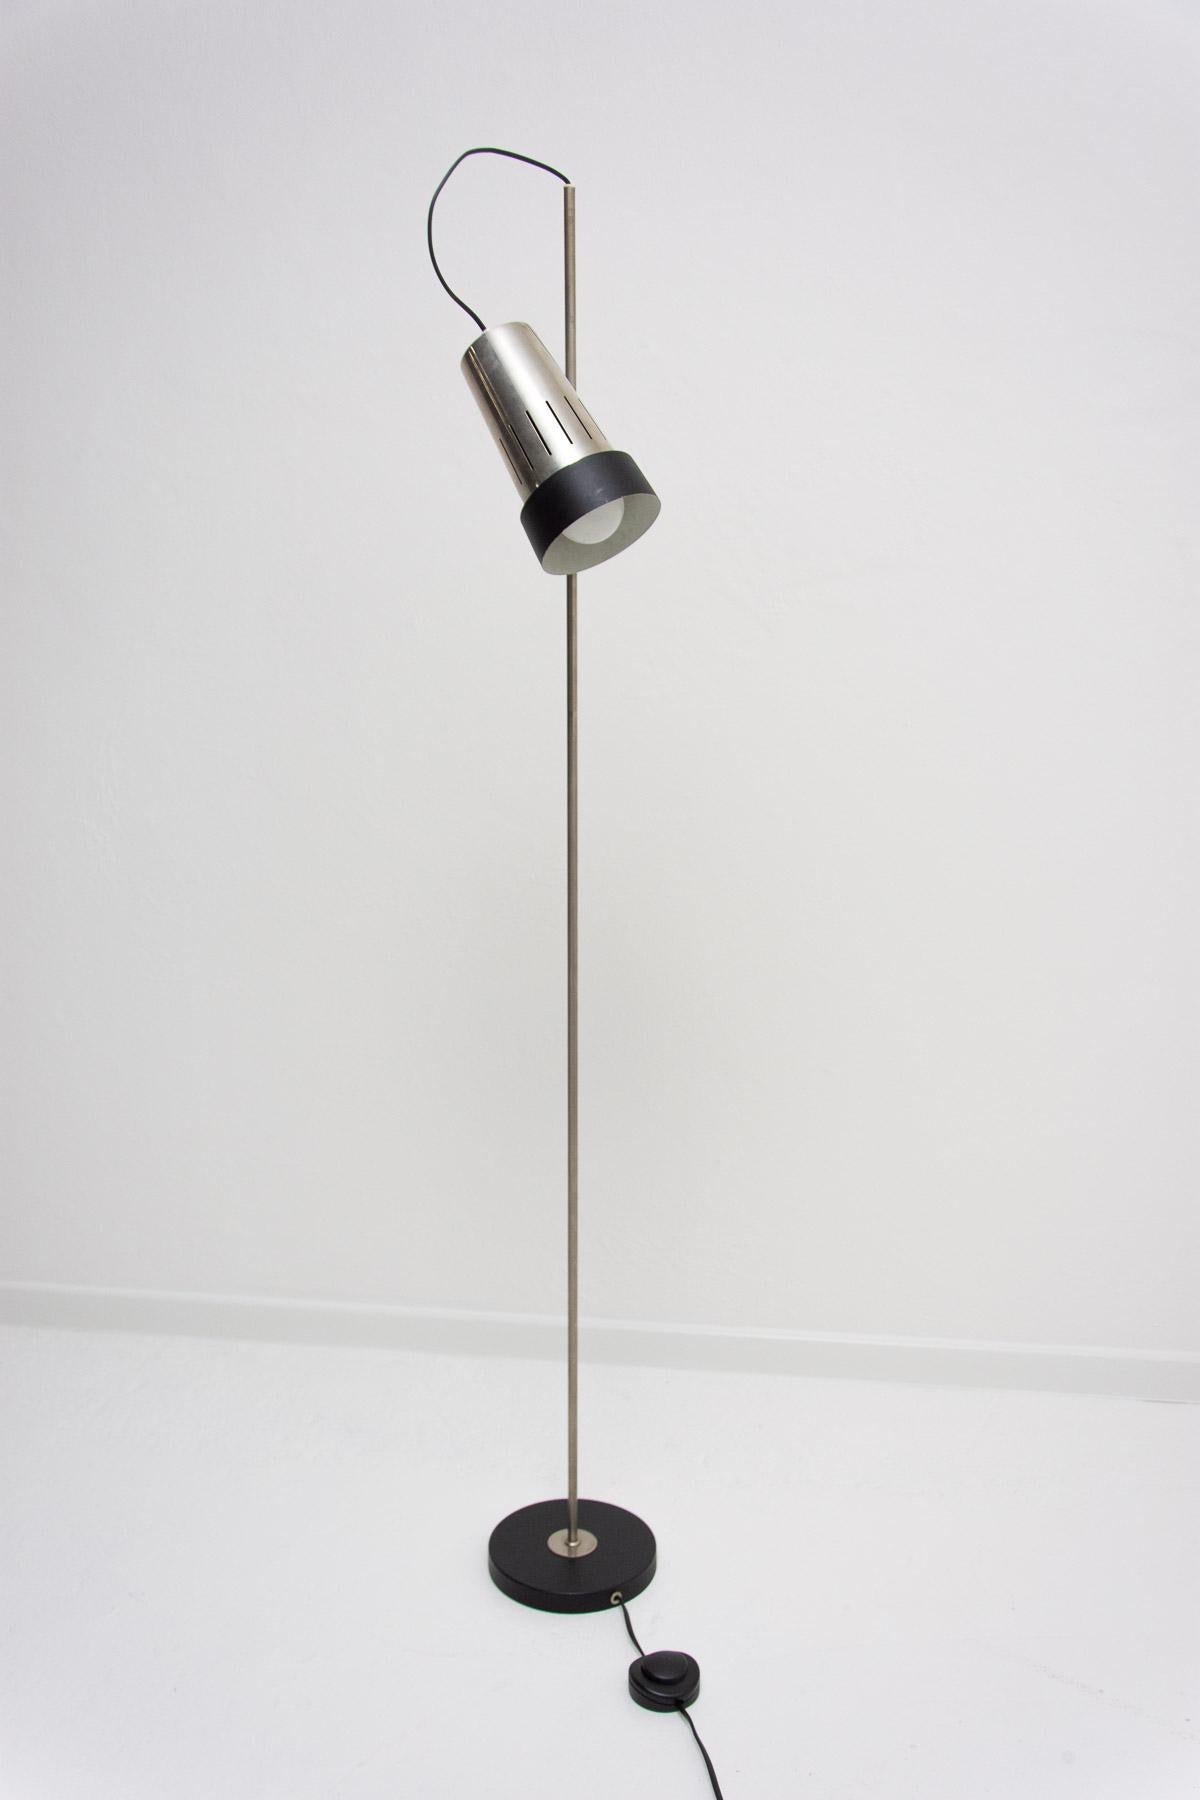 Mid century floor lamp or spotlight, made in the former Czechoslovakia in the 1960´s. Chrome plated construction. In very good Vintage condition. New wiring.

Height: 134 cm

Width: 20 cm

Depth: 20 cm